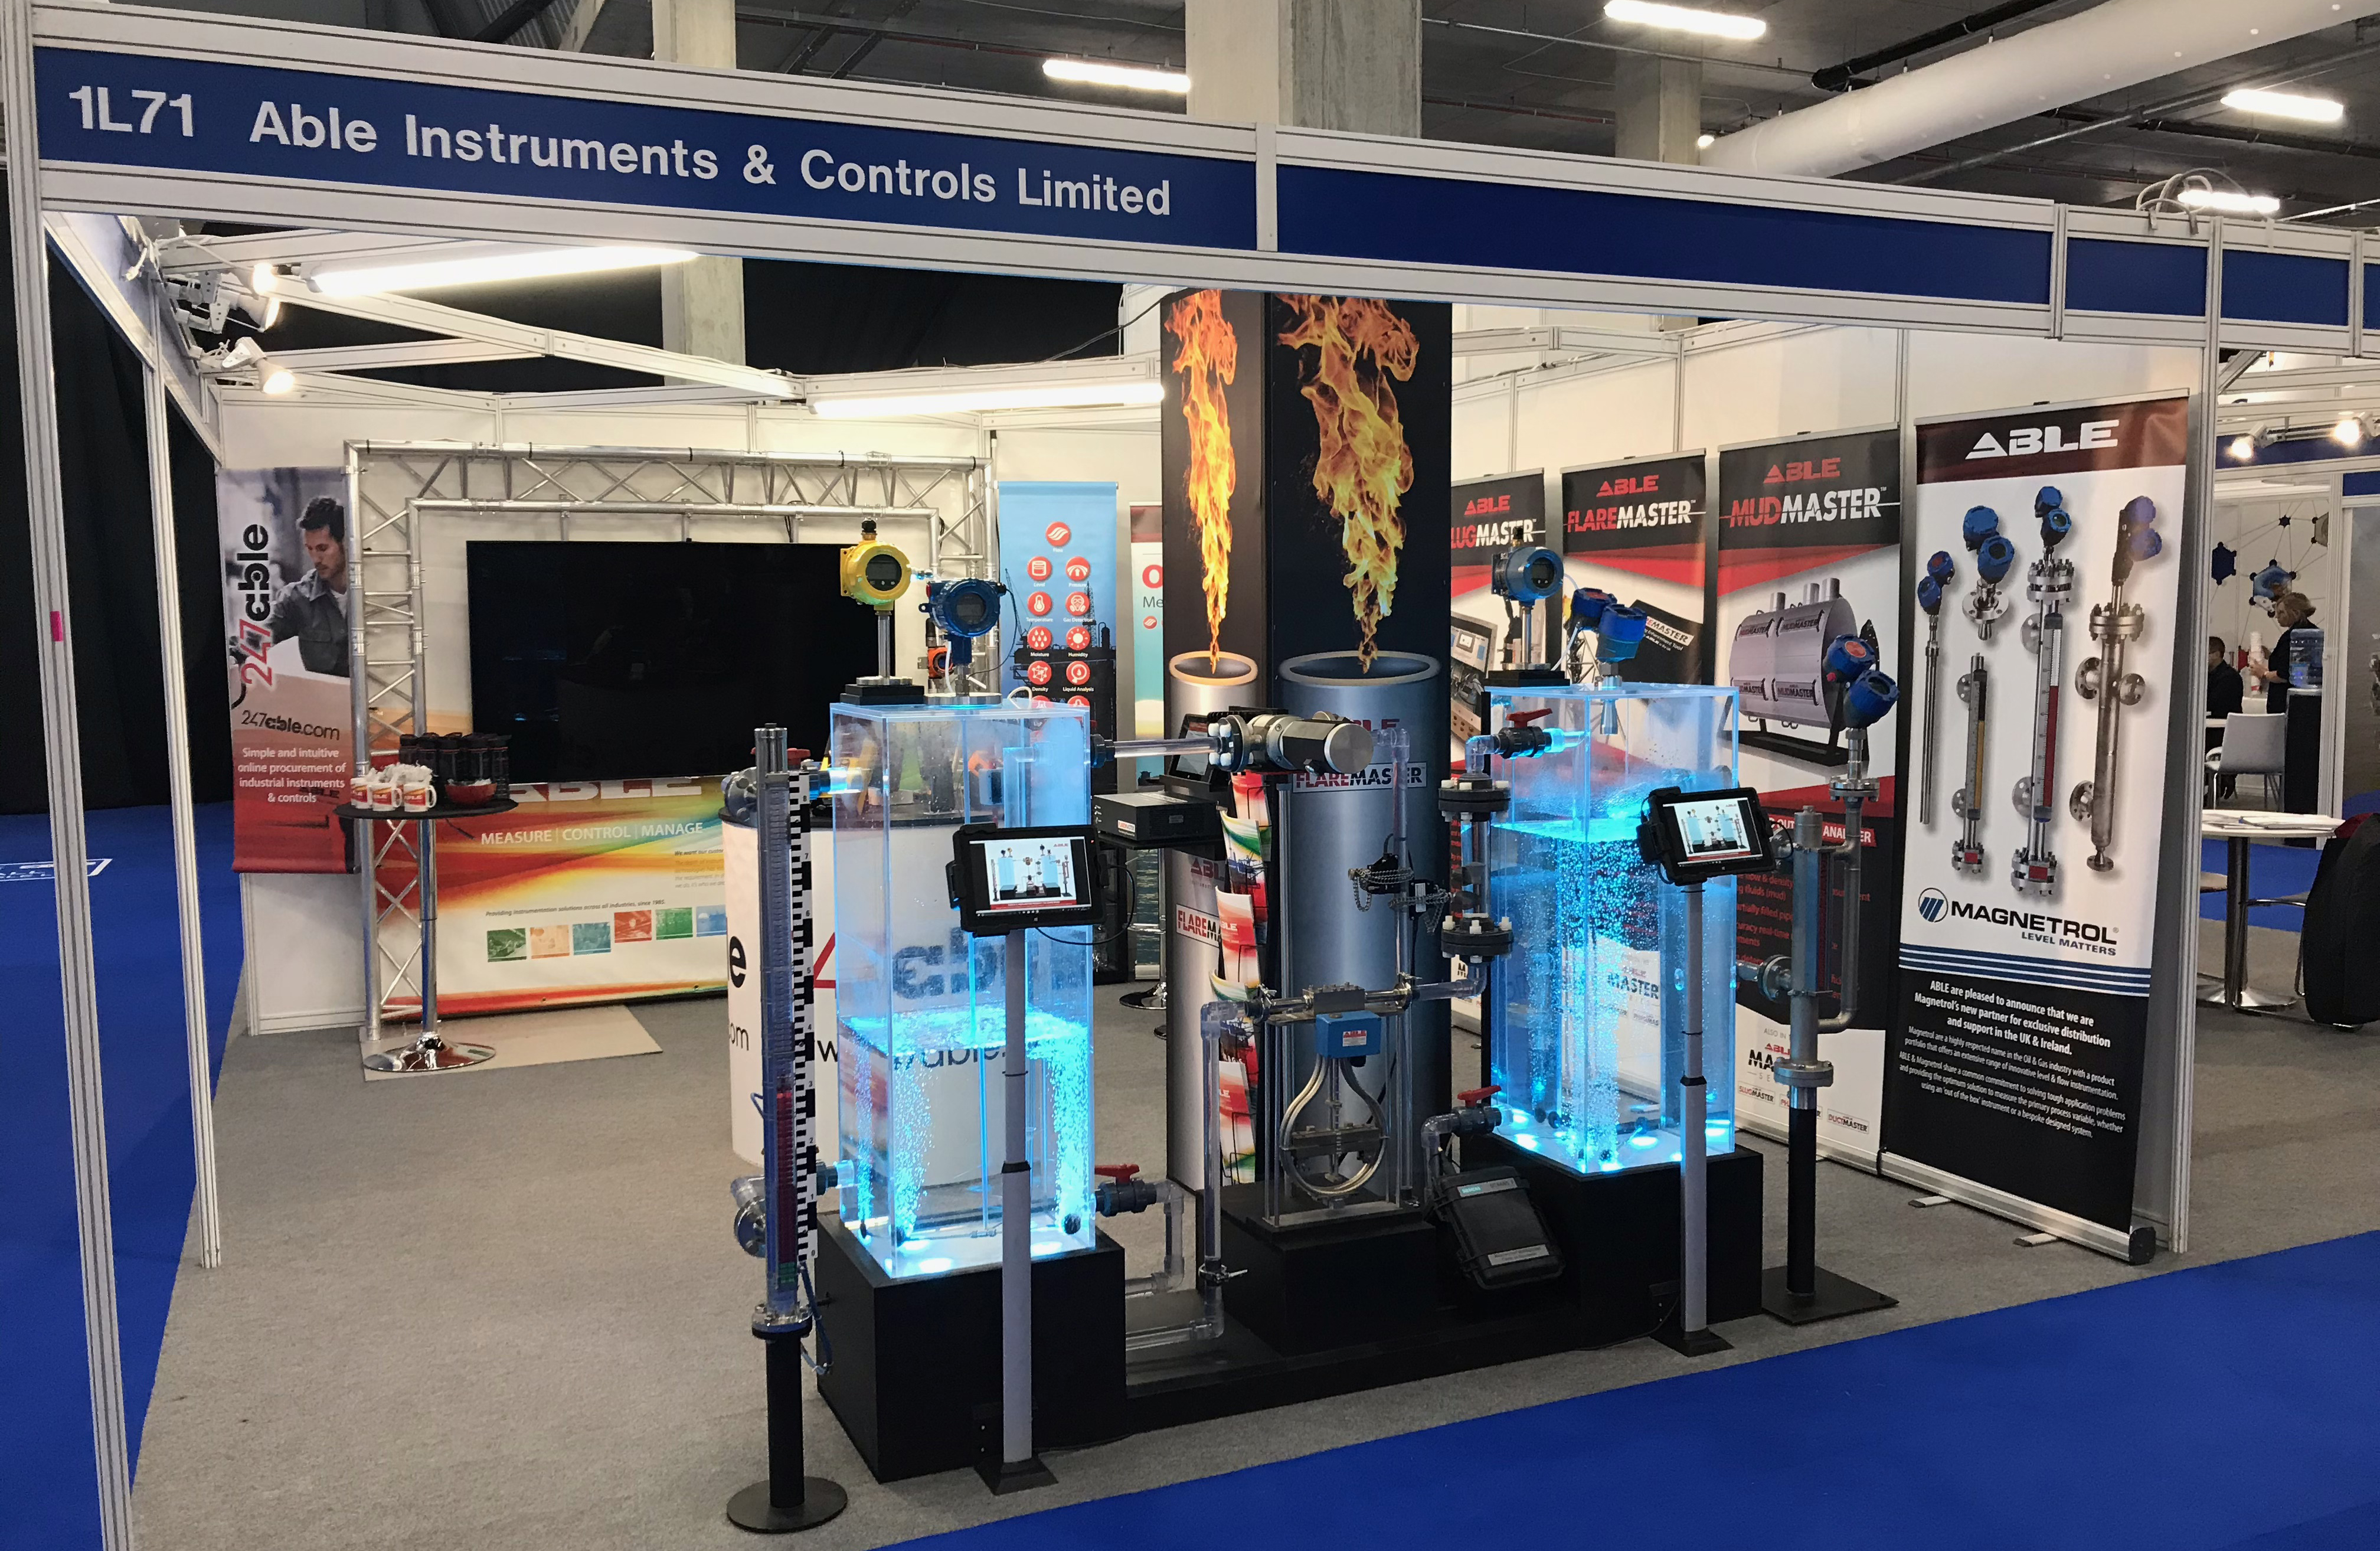 Offshore Europe 2019